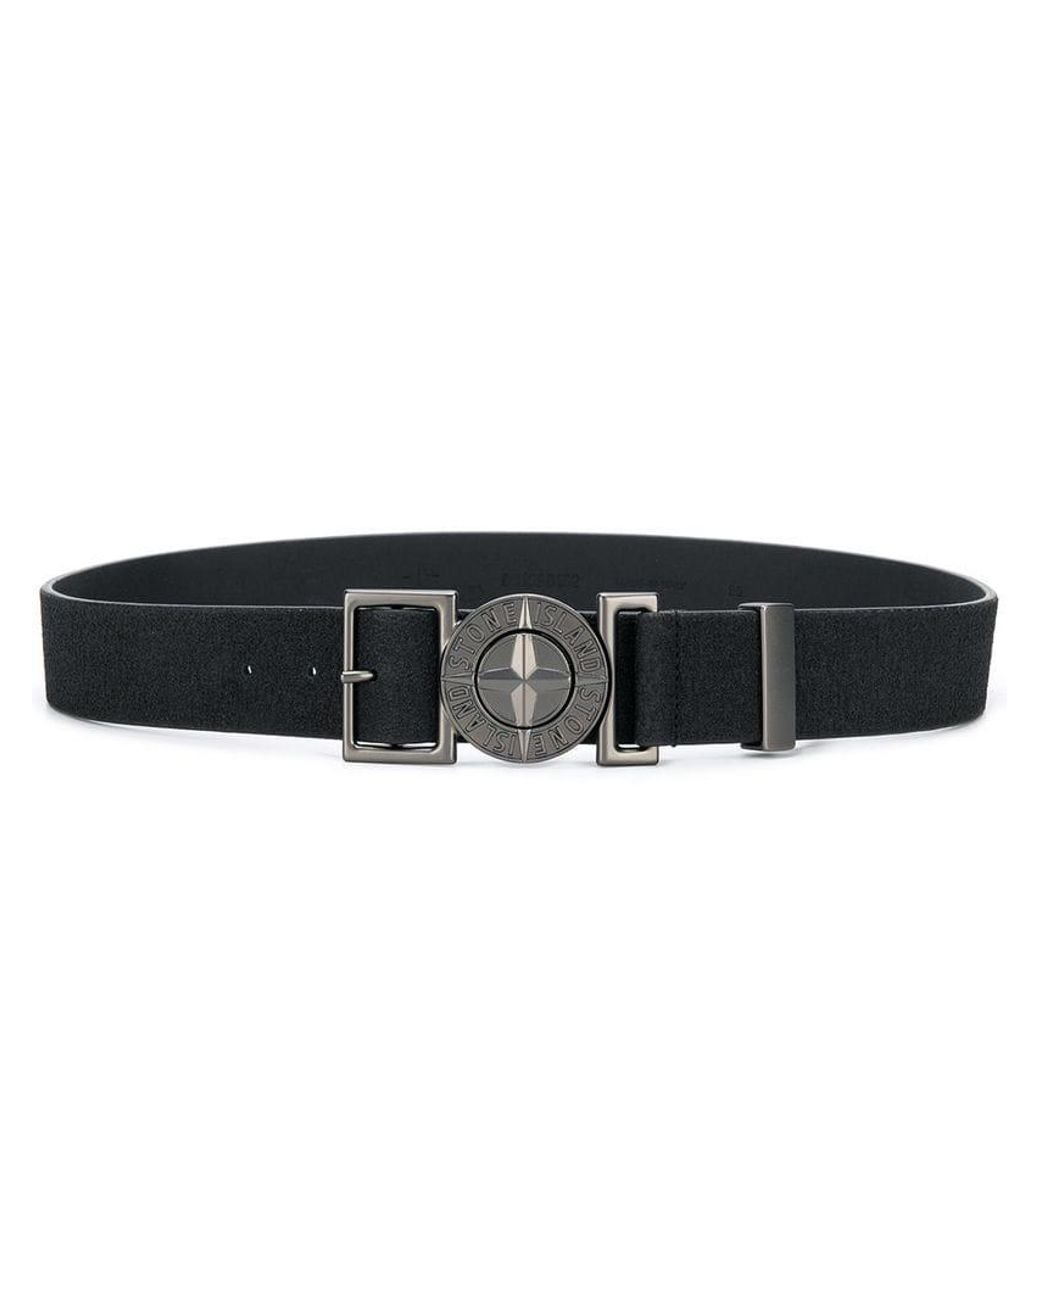 Stone Island Compass Buckle Belt in Black for Men | Lyst